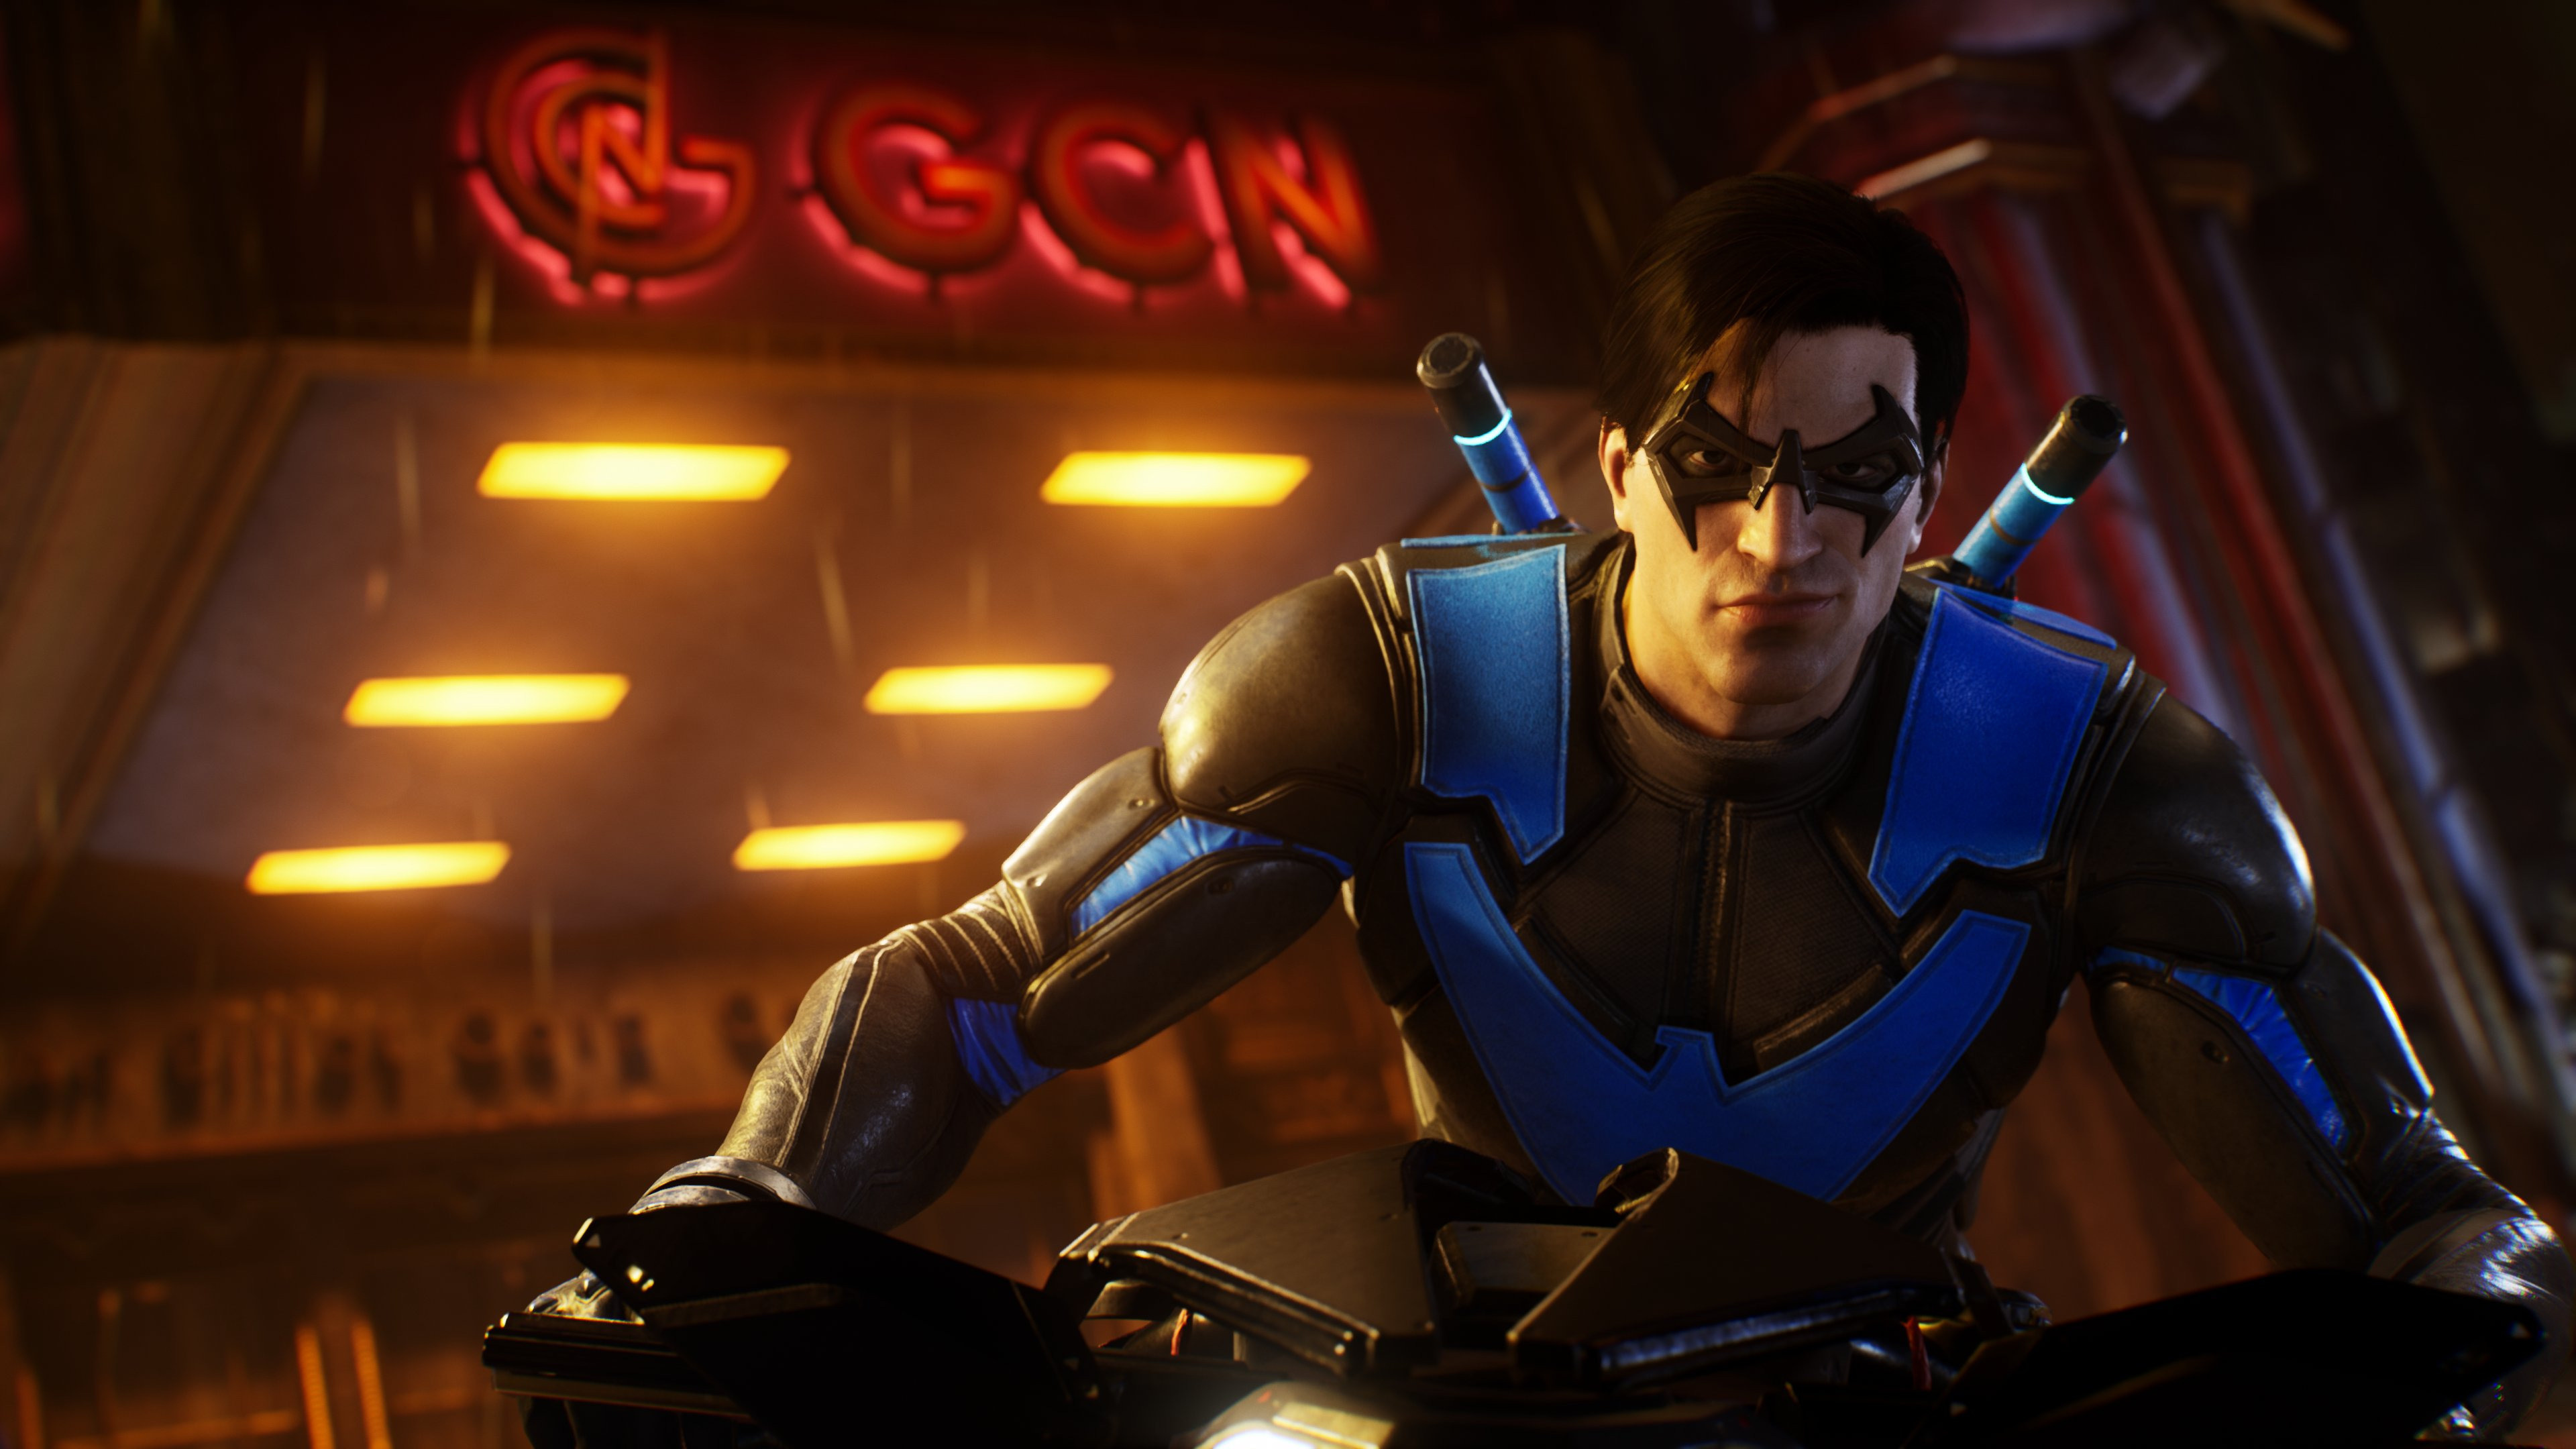 Gotham Knights (Game): Nightwing, The acrobatics master of the group known for fighting with his two escrima sticks. 3840x2160 4K Background.